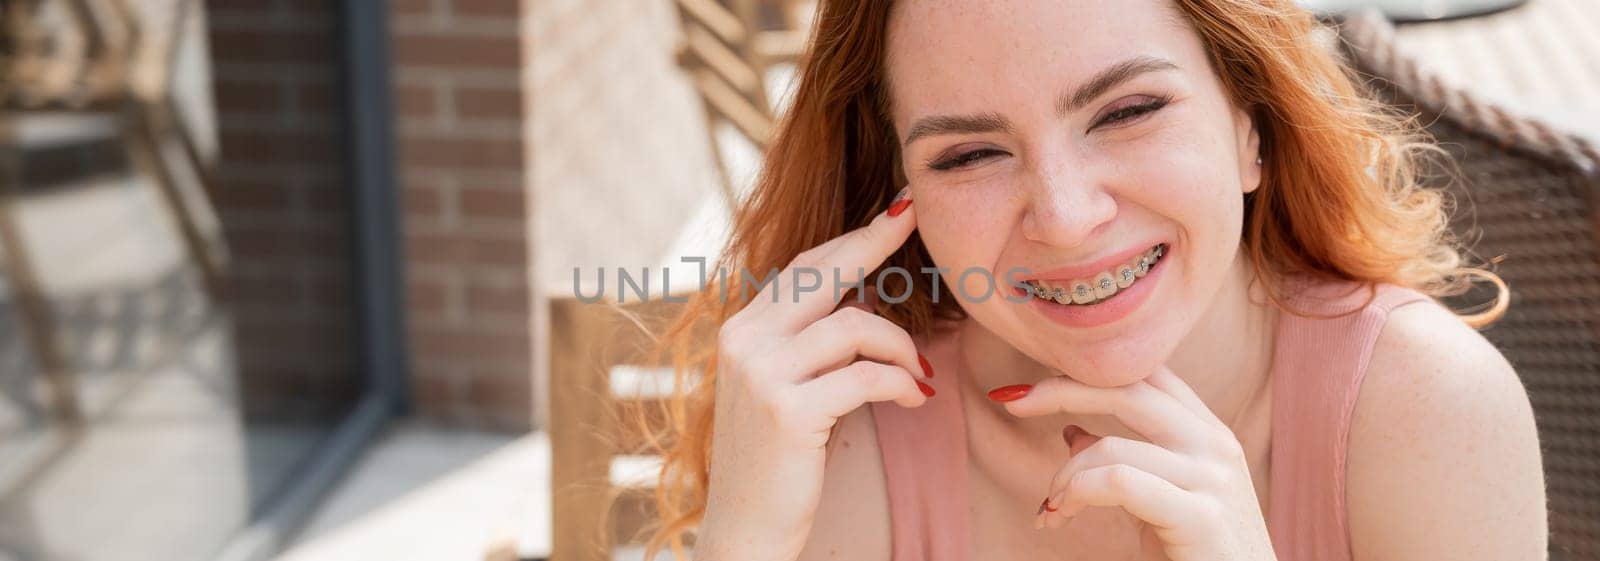 Beautiful young red-haired woman with braces on her teeth smiling while sitting in an outdoor cafe. Widescreen